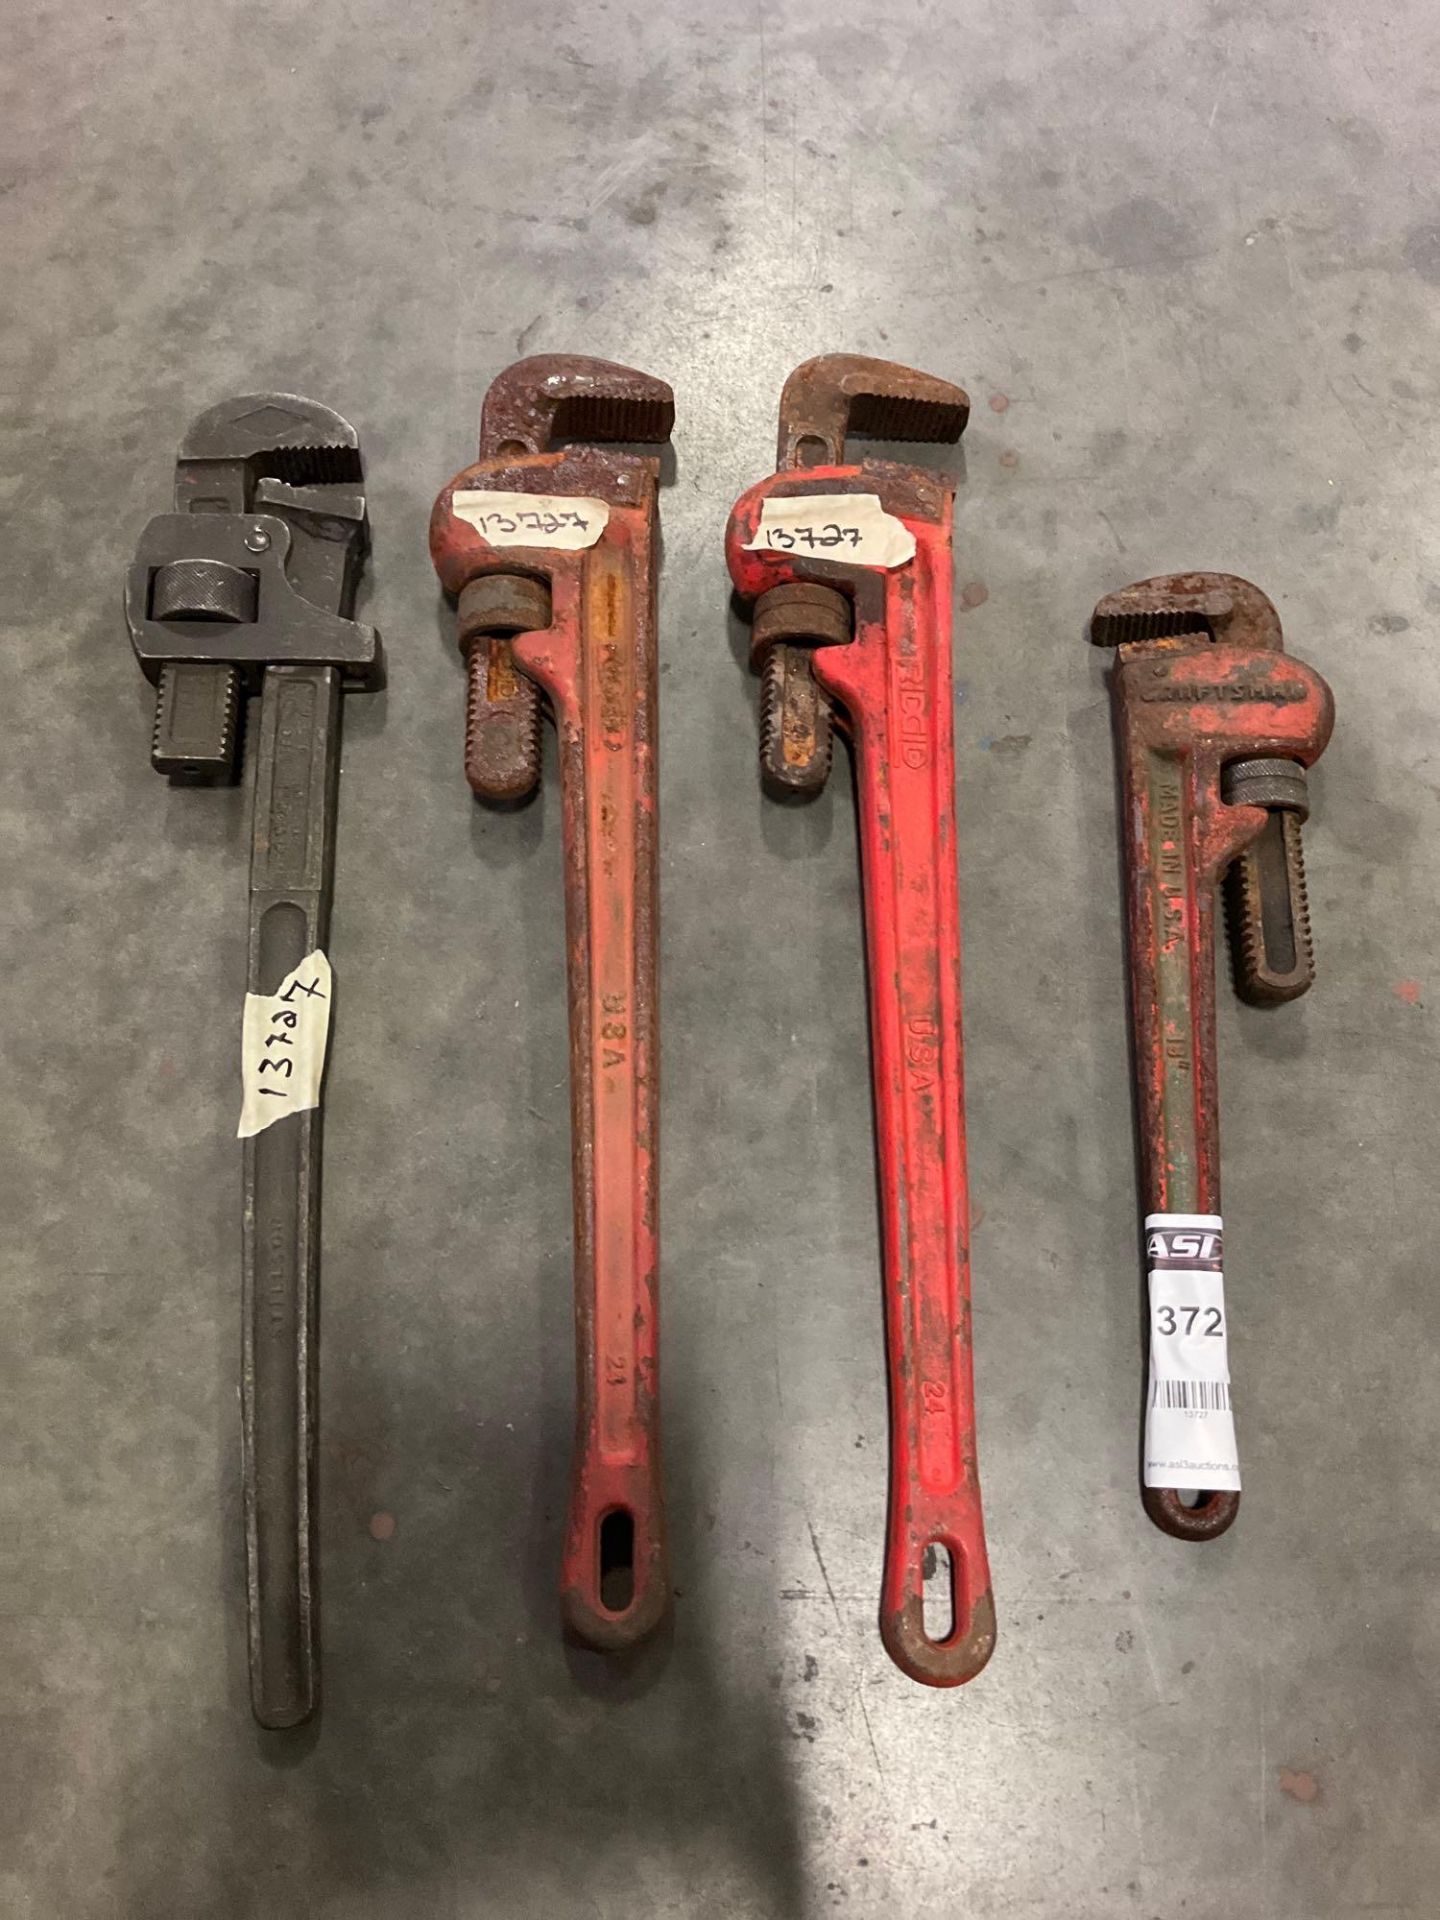 ( 2) RIDGID ( 1 ) CRAFTSMAN & ( 1 ) MISC PIPE WRENCHES